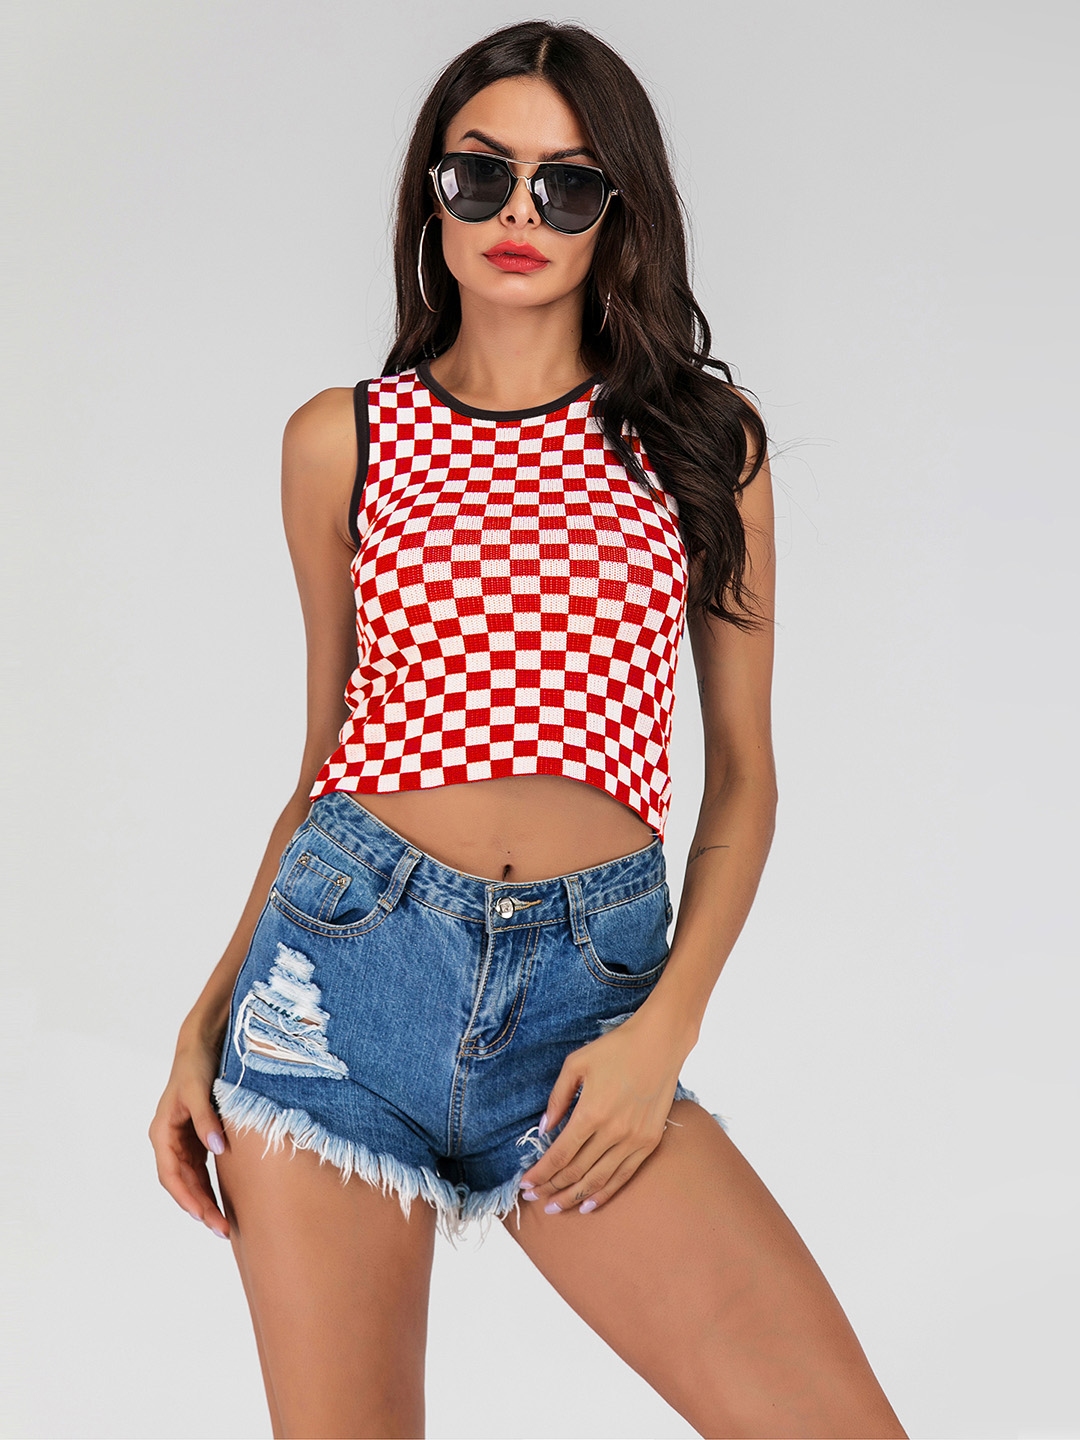 Buy URBANIC Red & White Checkered Crop Top - Tops for Women